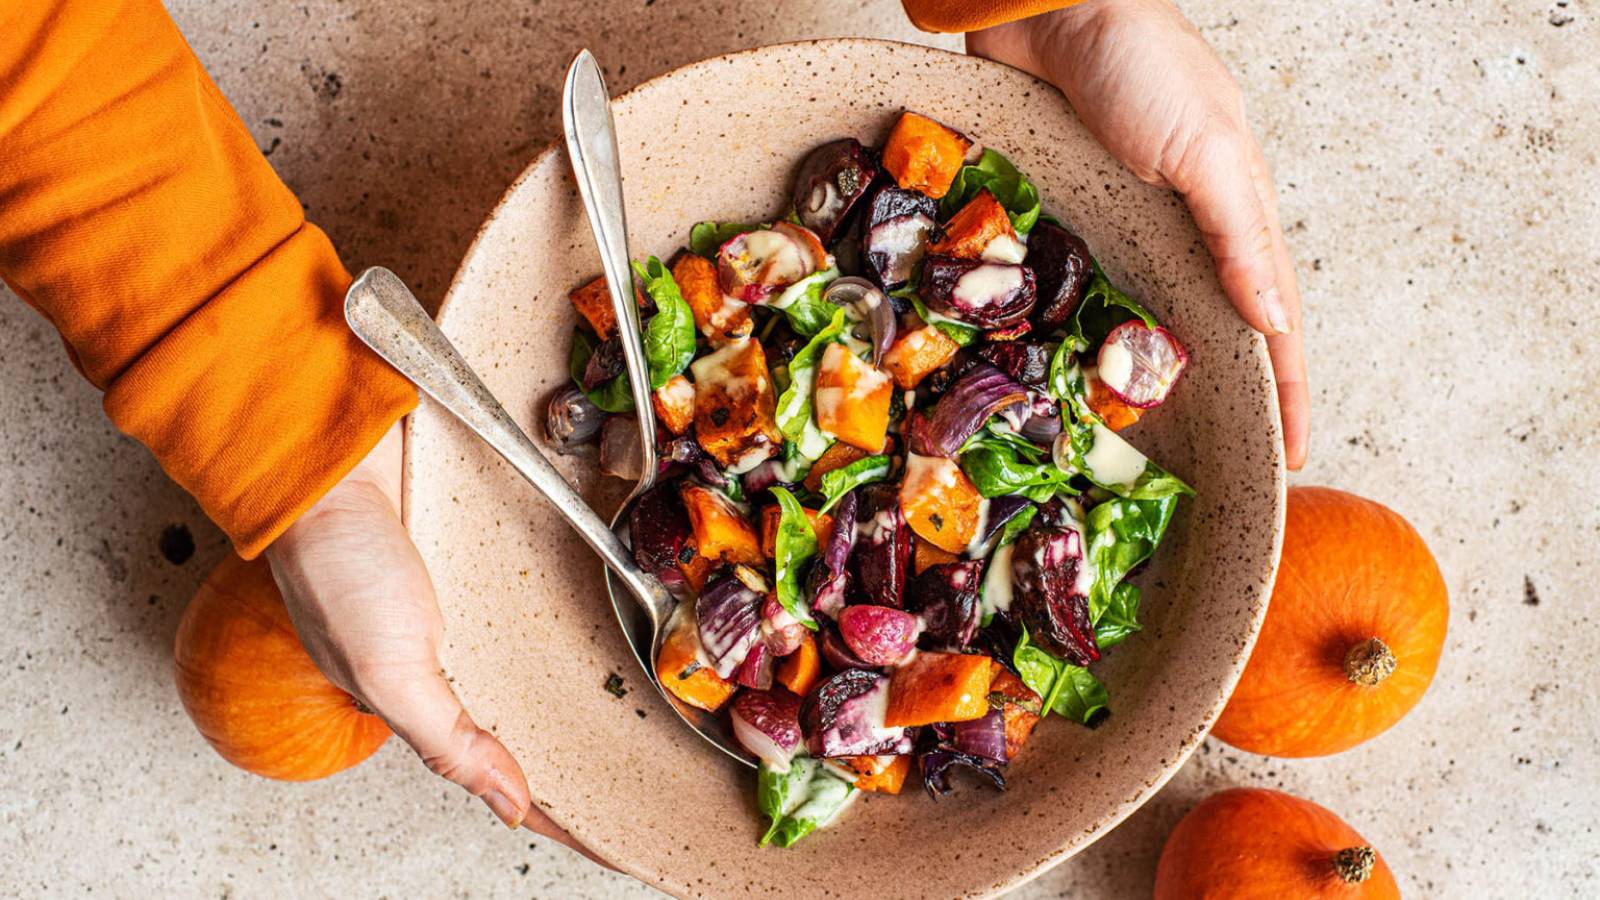 Two hands cradle a bowl full of roasted pumpkin and beet salad.